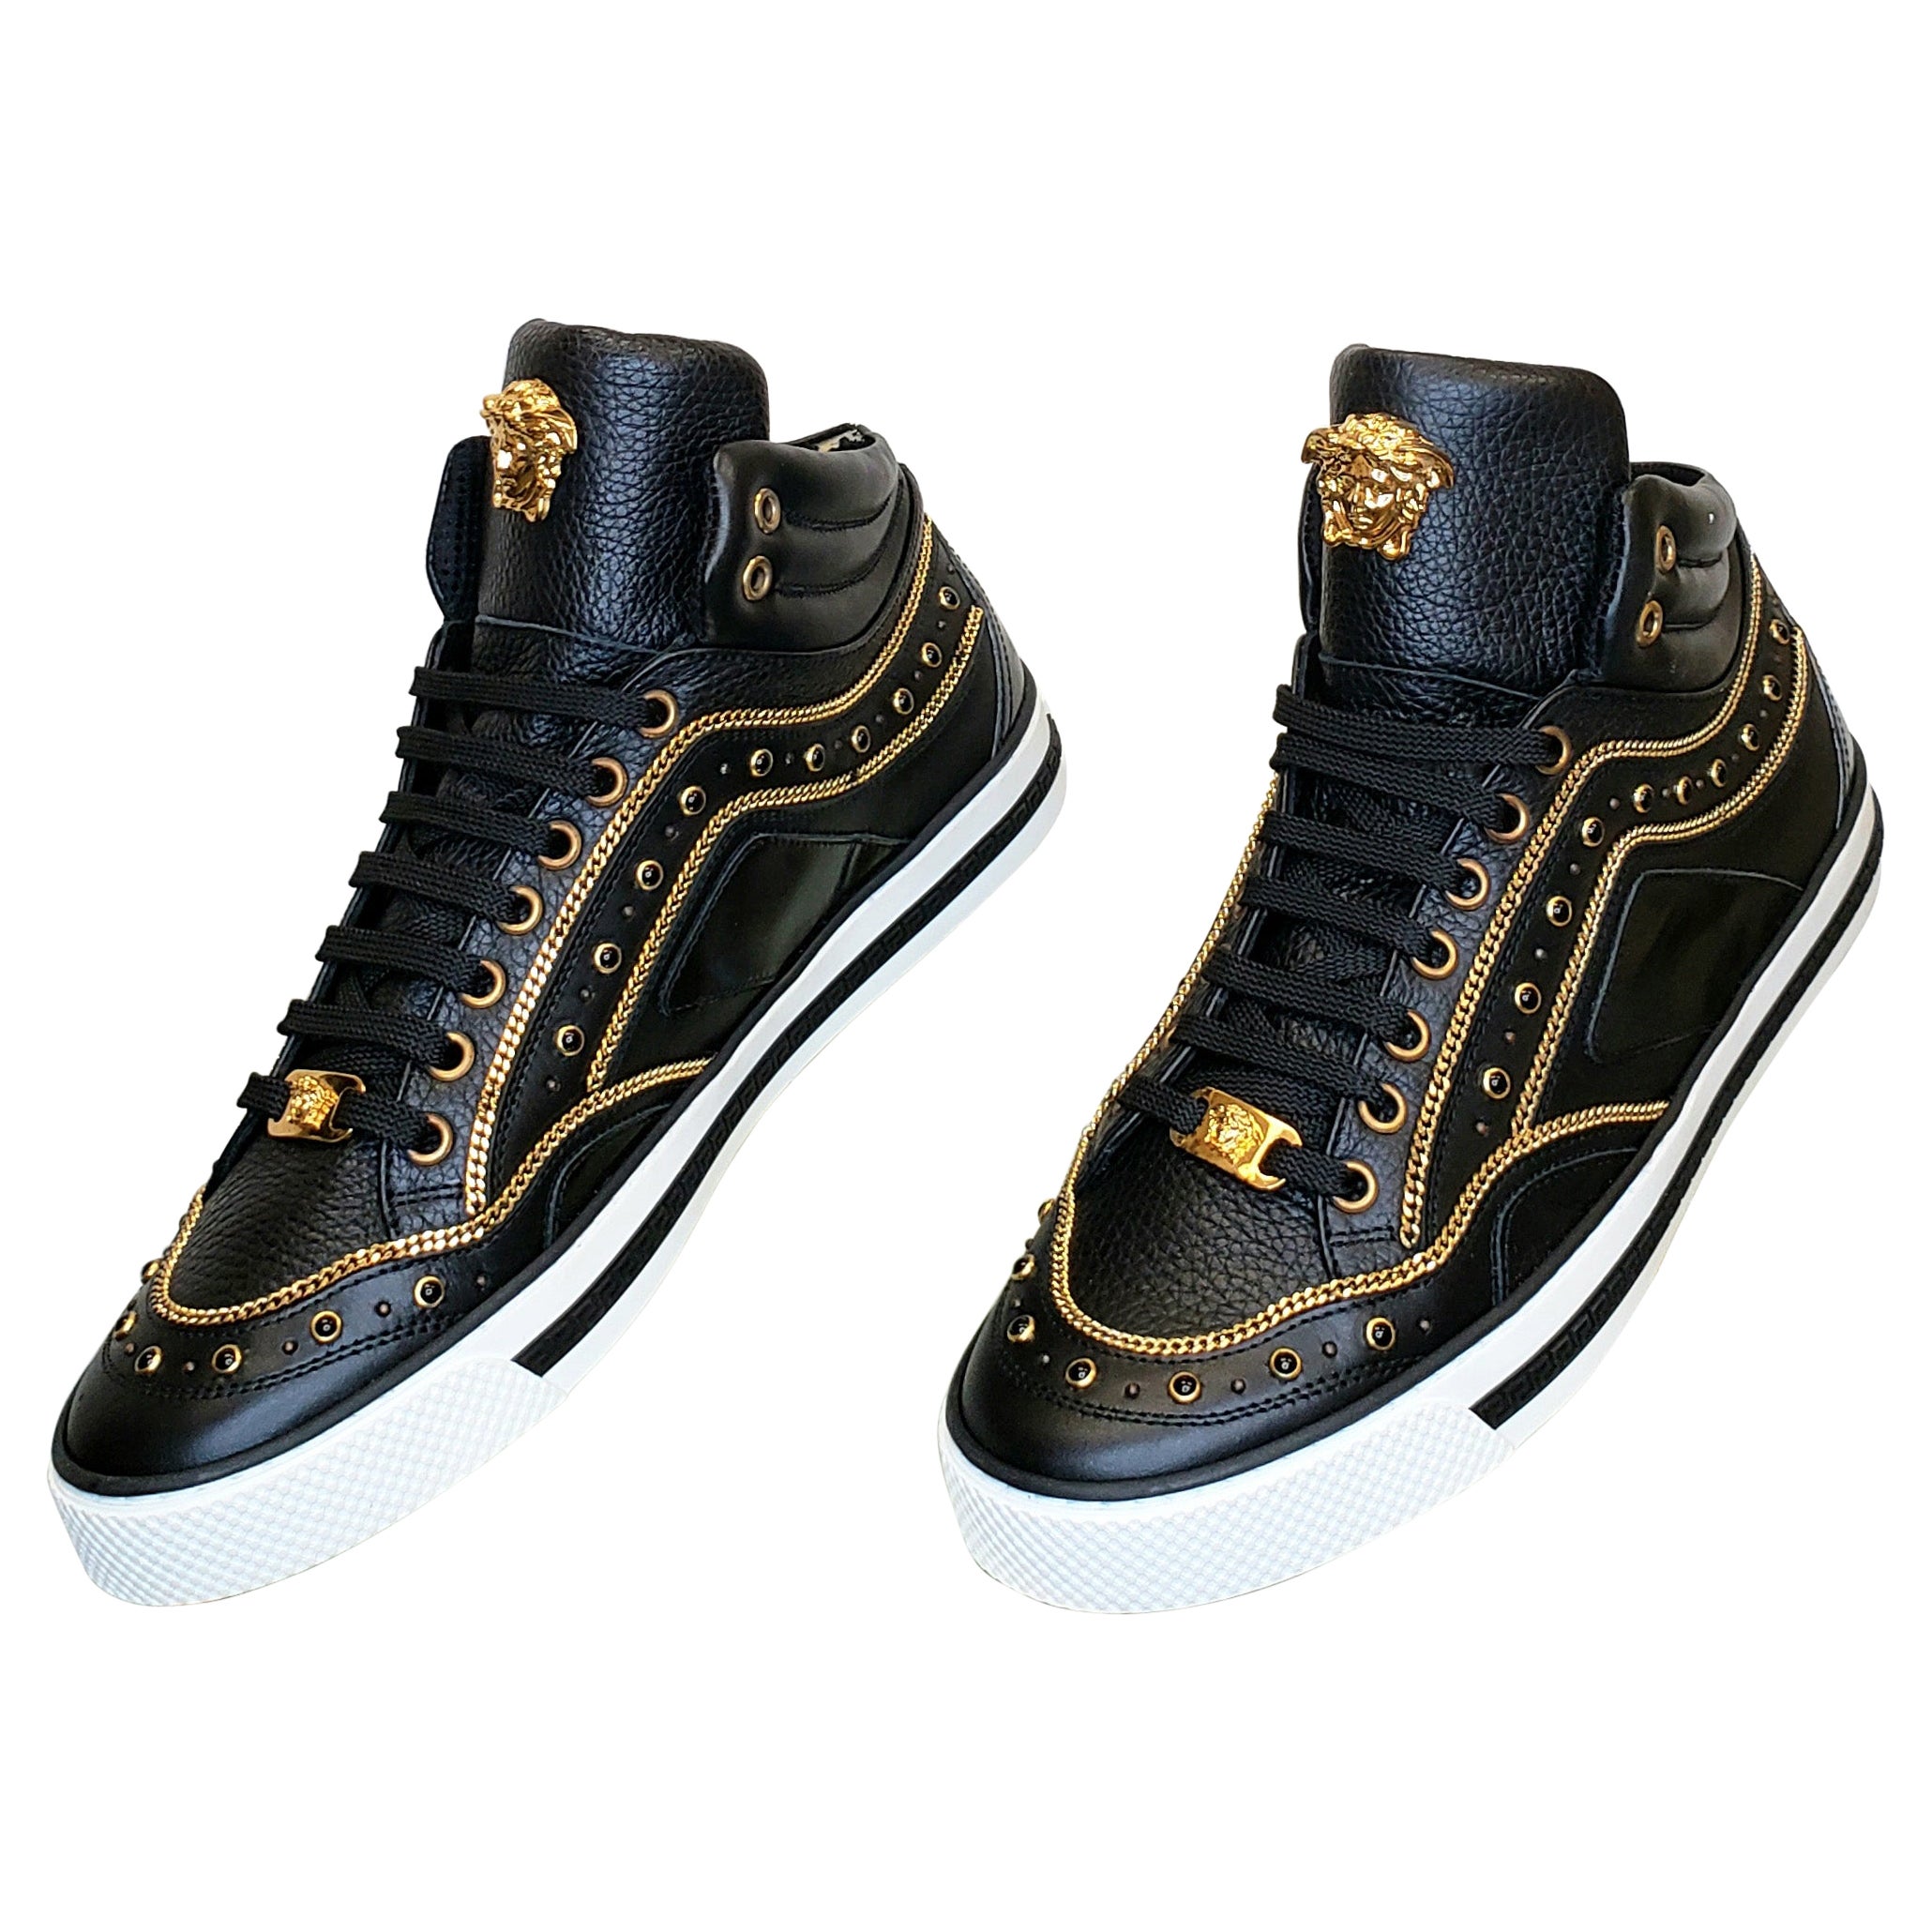 NEW VERSACE STUDDED HIGH-TOP SNEAKERS with GOLD 3D MEDUSA BUCKLE SIZE 39 - 6